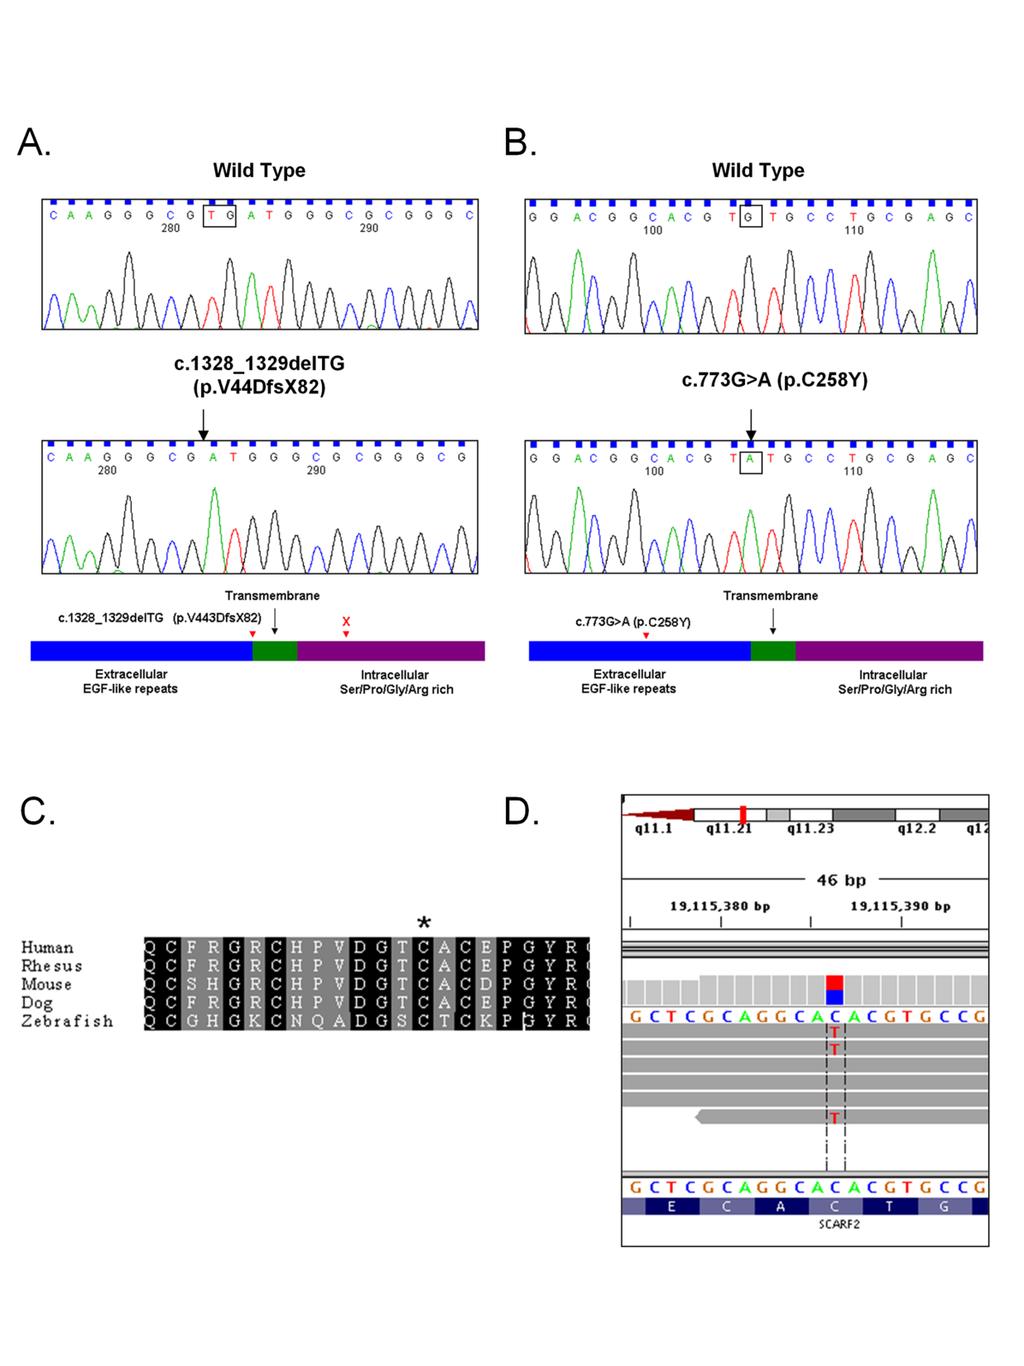 We concurrently conducted conventional Sanger sequencing of candidate genes and whole-exome sequencing.